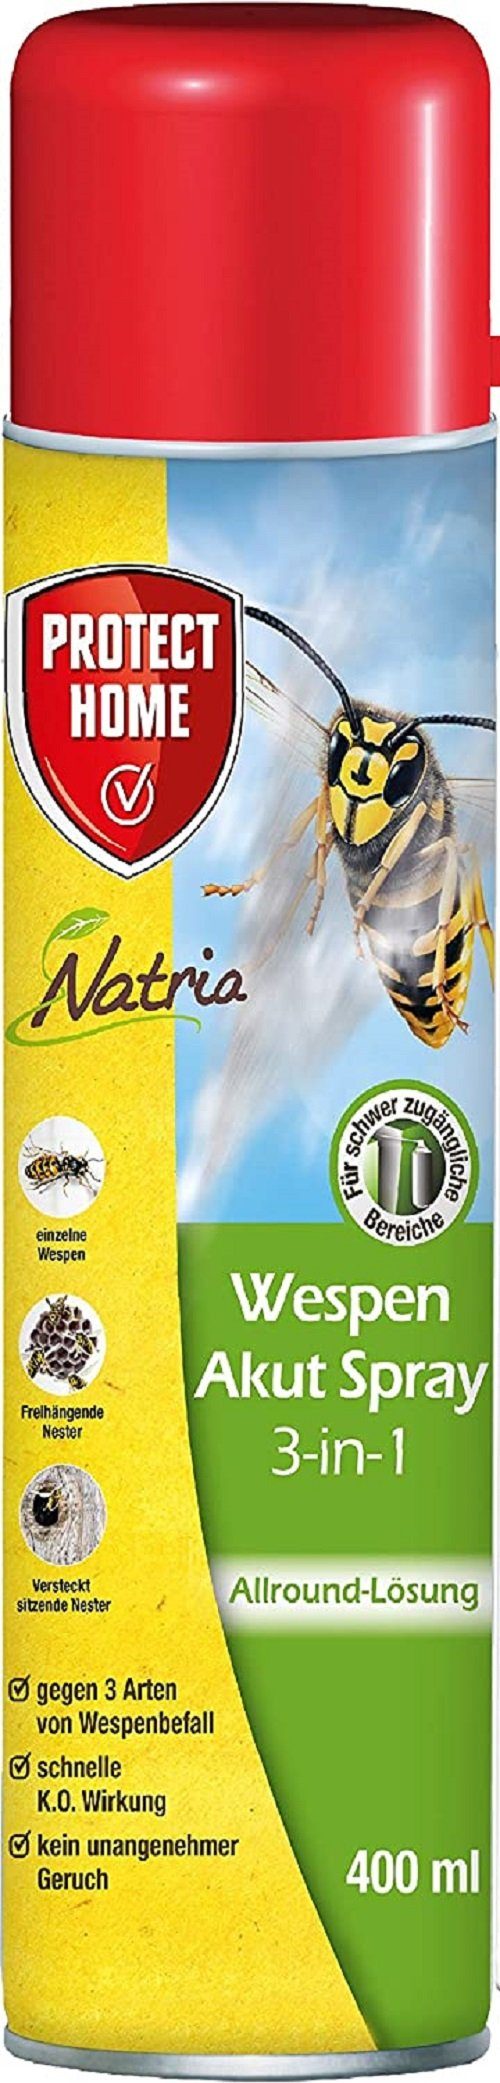 Protect Home Wespenspray Protect Home Natria Wespen Akut Spray (3 in 1) 3 Fachwirkung gegen Wes | Insektizide